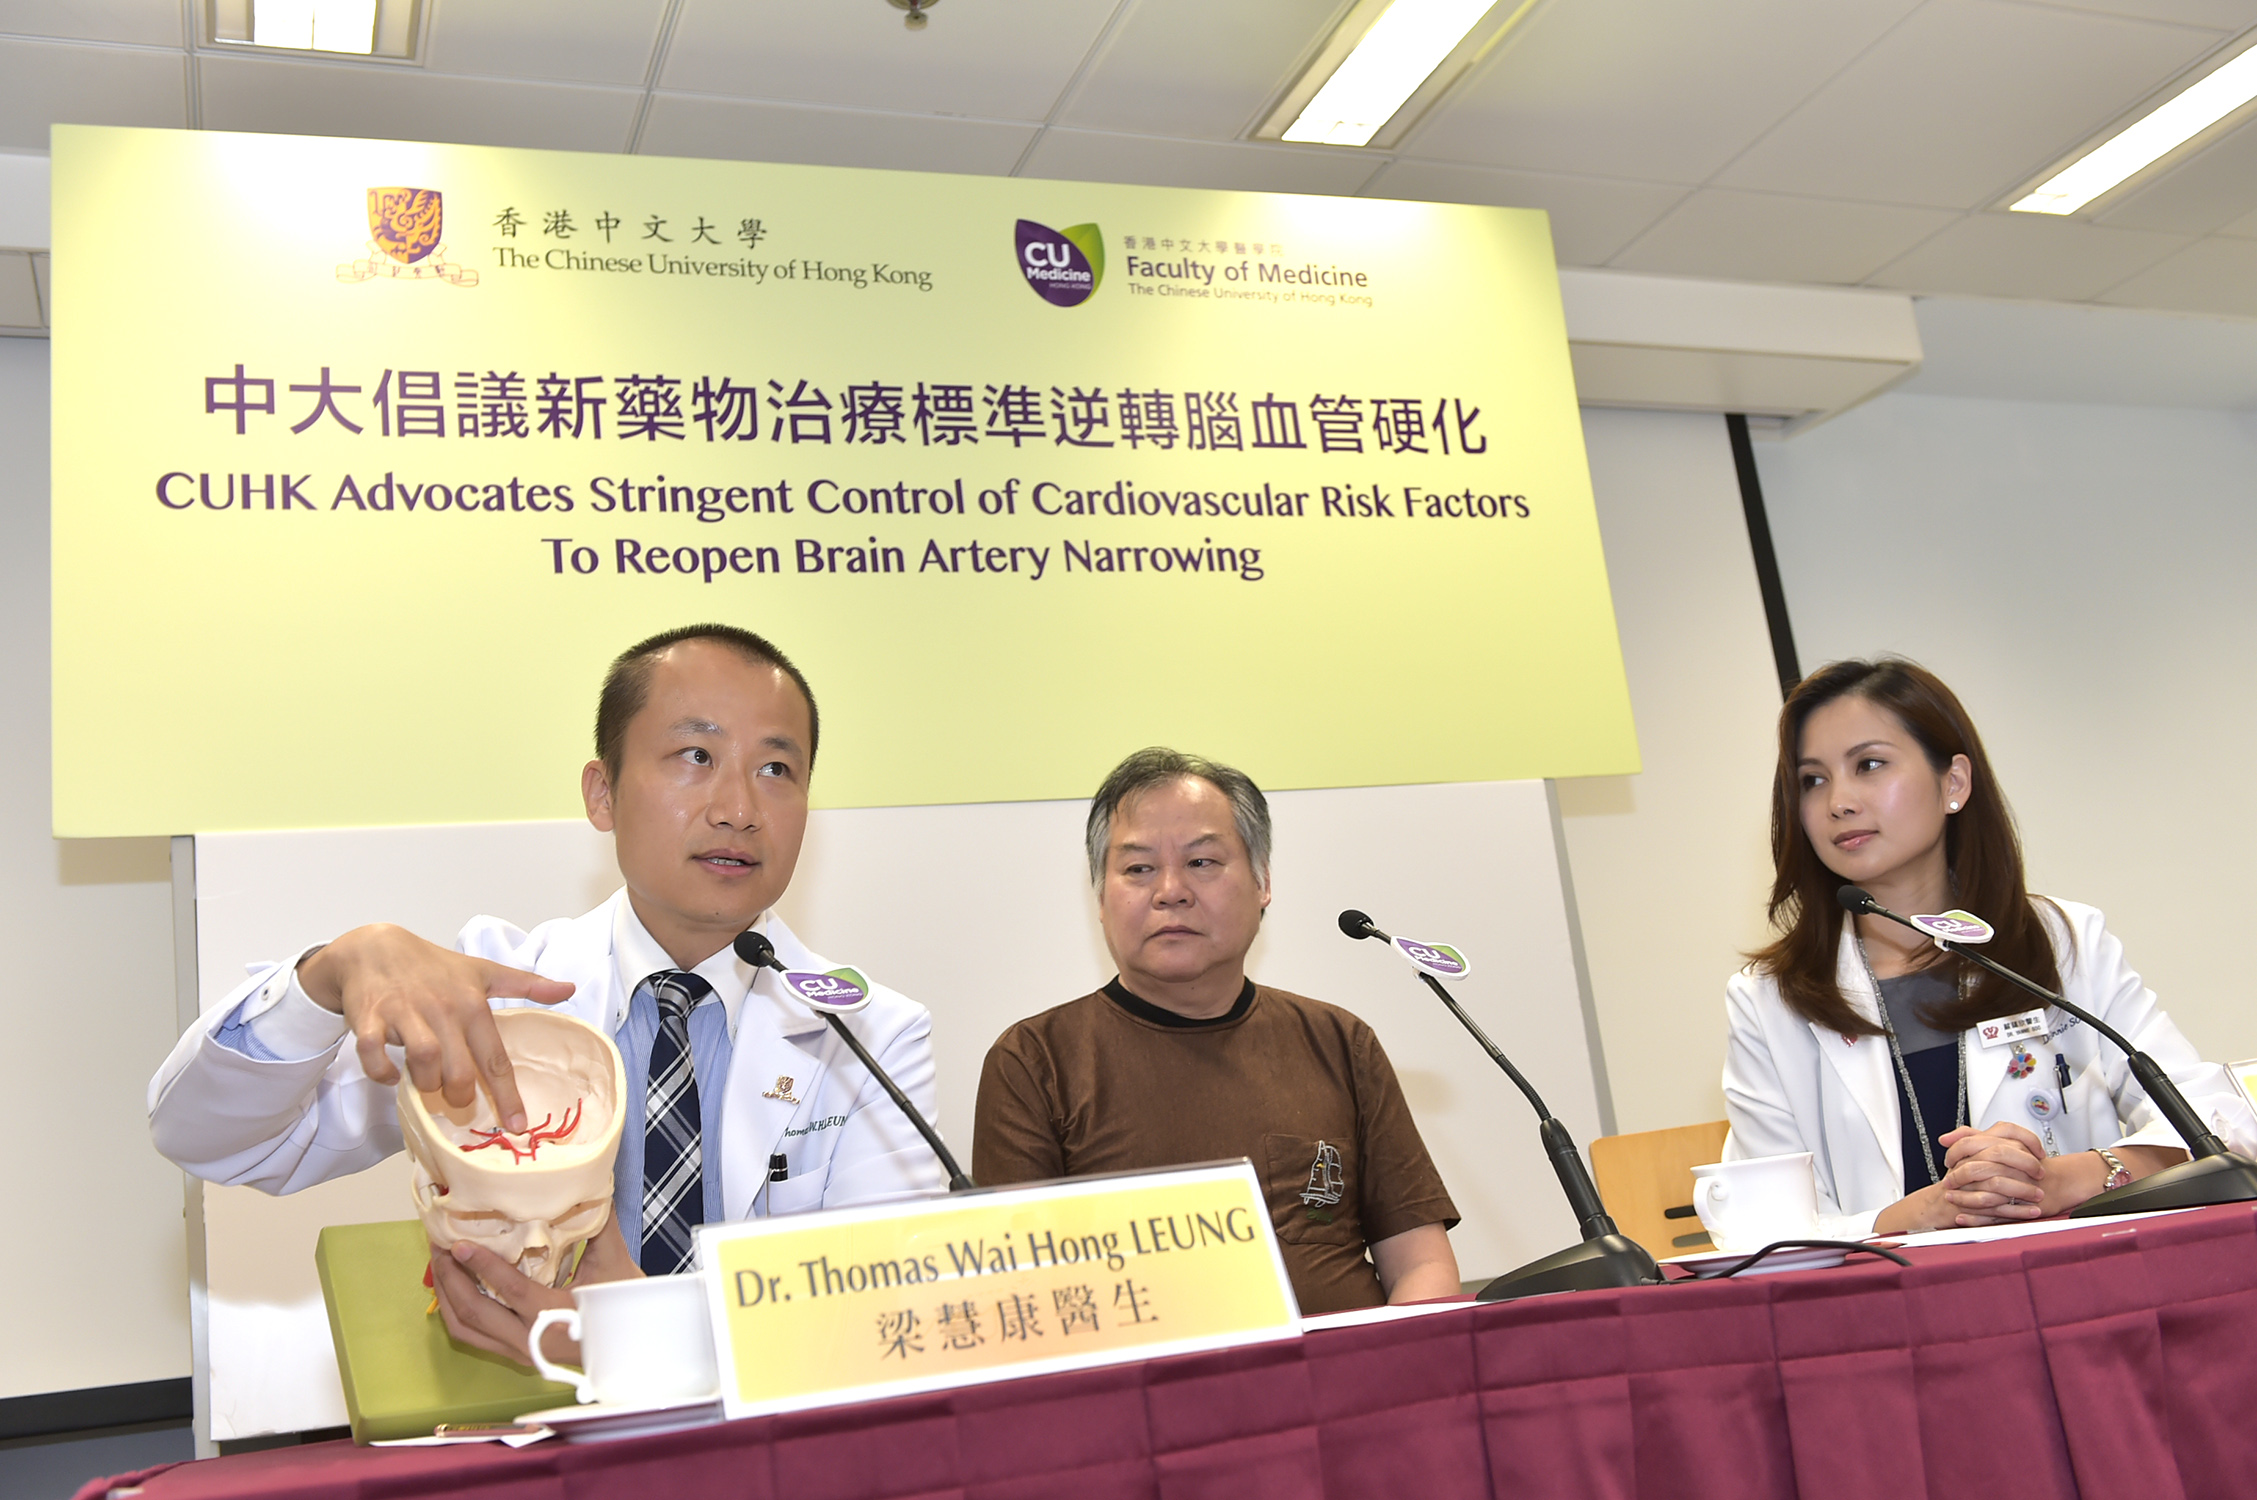 The arterial stenosis of Mr. Lo (middle), who was diagnosed stroke 5 years ago, has diminished from 79% to 58% after a year of aggressive medical approach in controlling risk factors such as blood sugar, blood pressure and lipid levels.